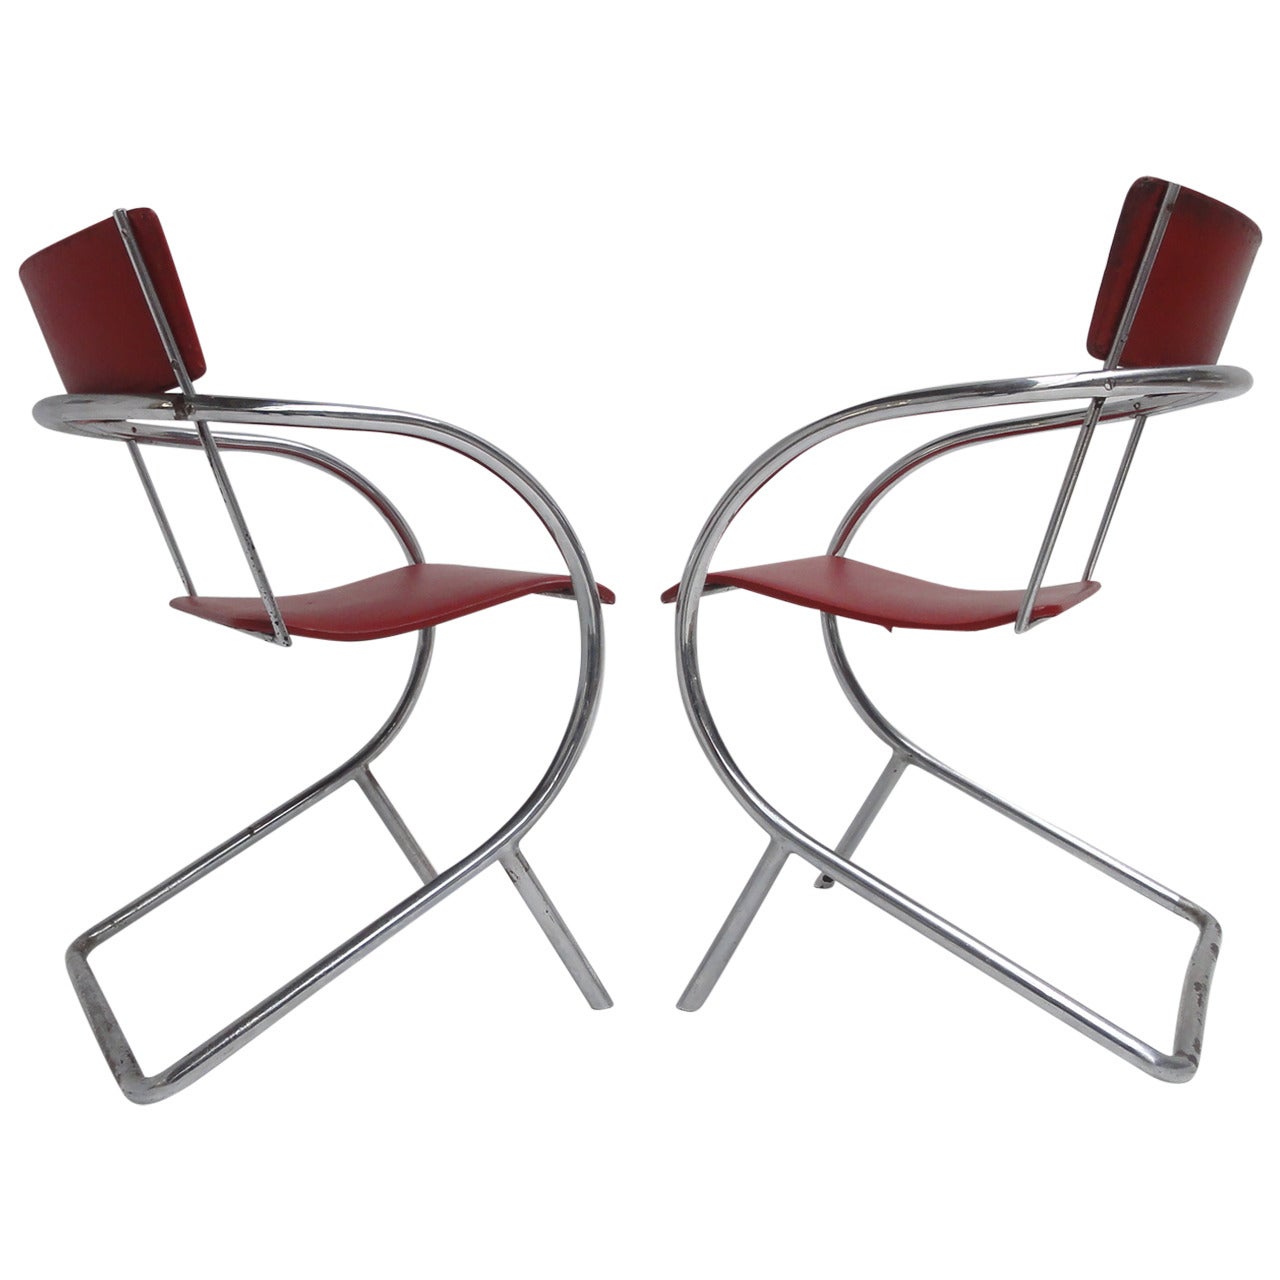 Pair of 1932 Dutch Avant Garde, Model 32 Chairs by Paul Schuitema for D3 For Sale